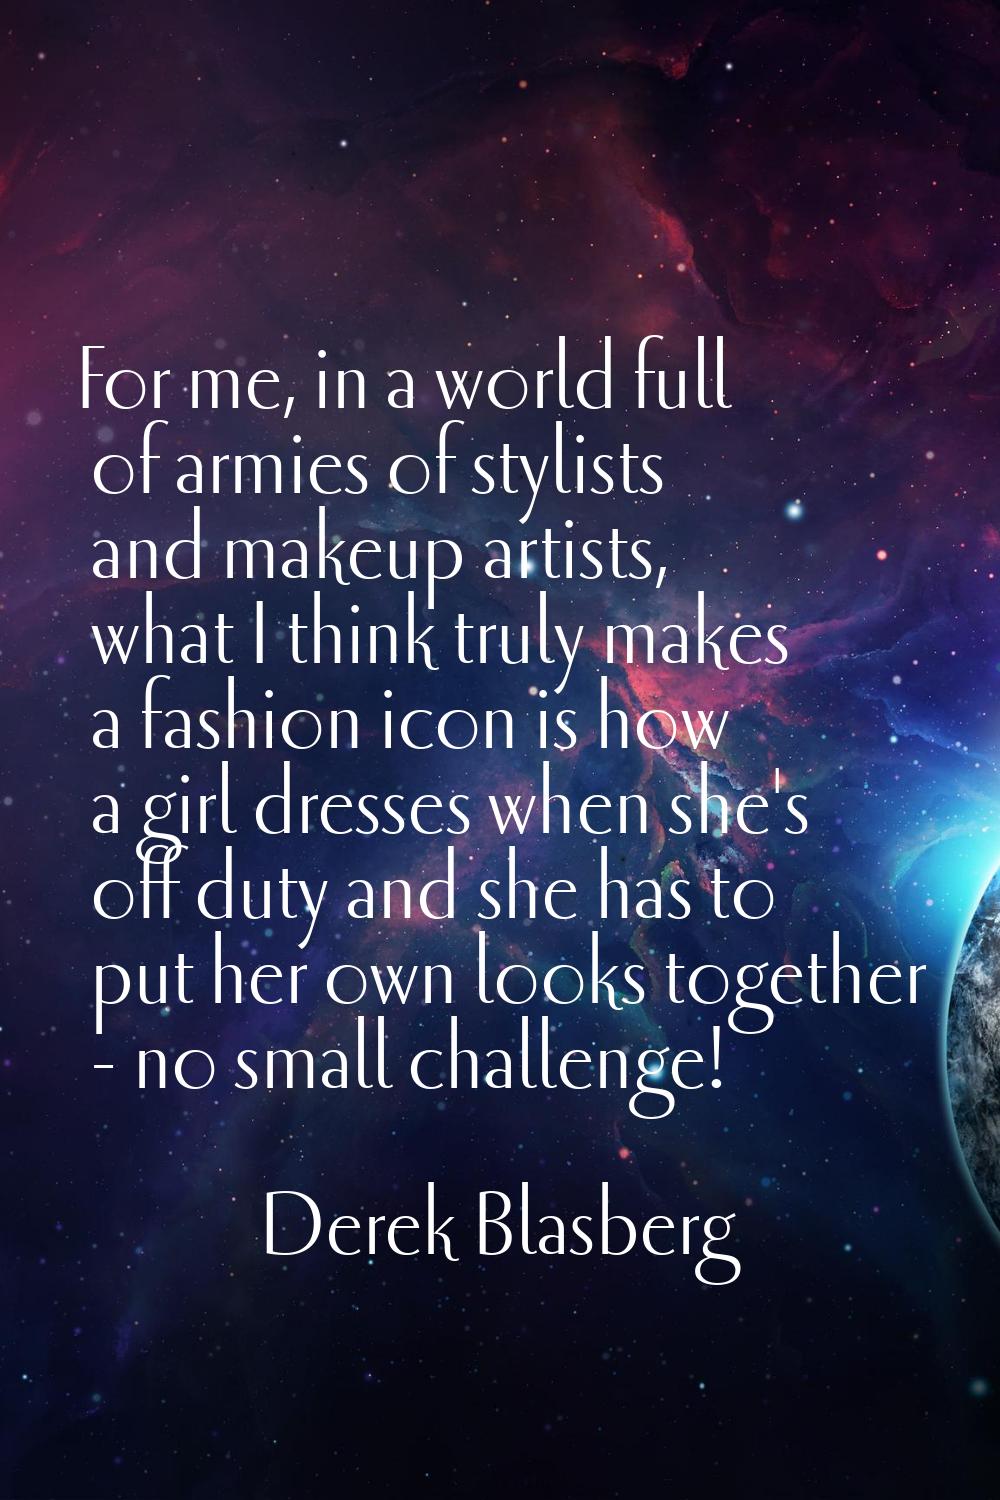 For me, in a world full of armies of stylists and makeup artists, what I think truly makes a fashio